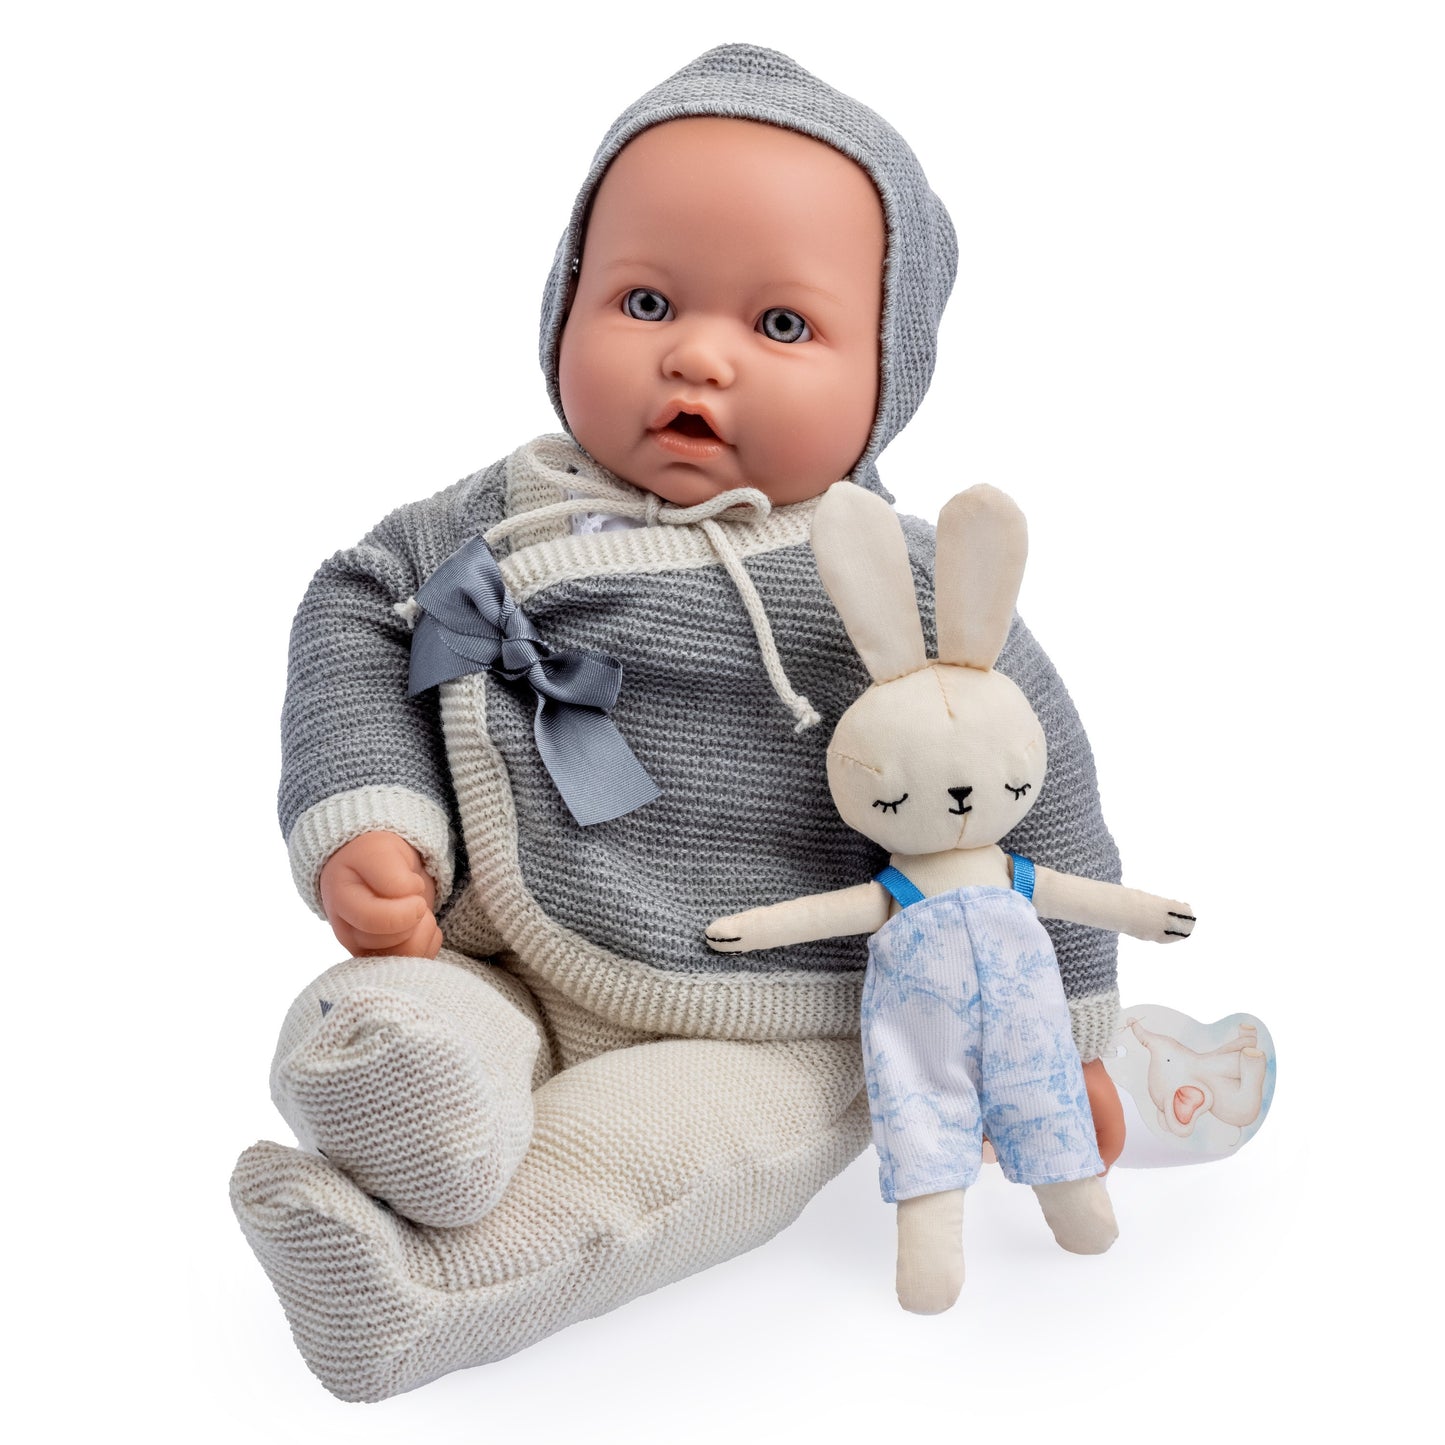 JC Toys La Baby Original Gray Collection Gift Set 17" Soft Body with Bright Sparkling Eyes